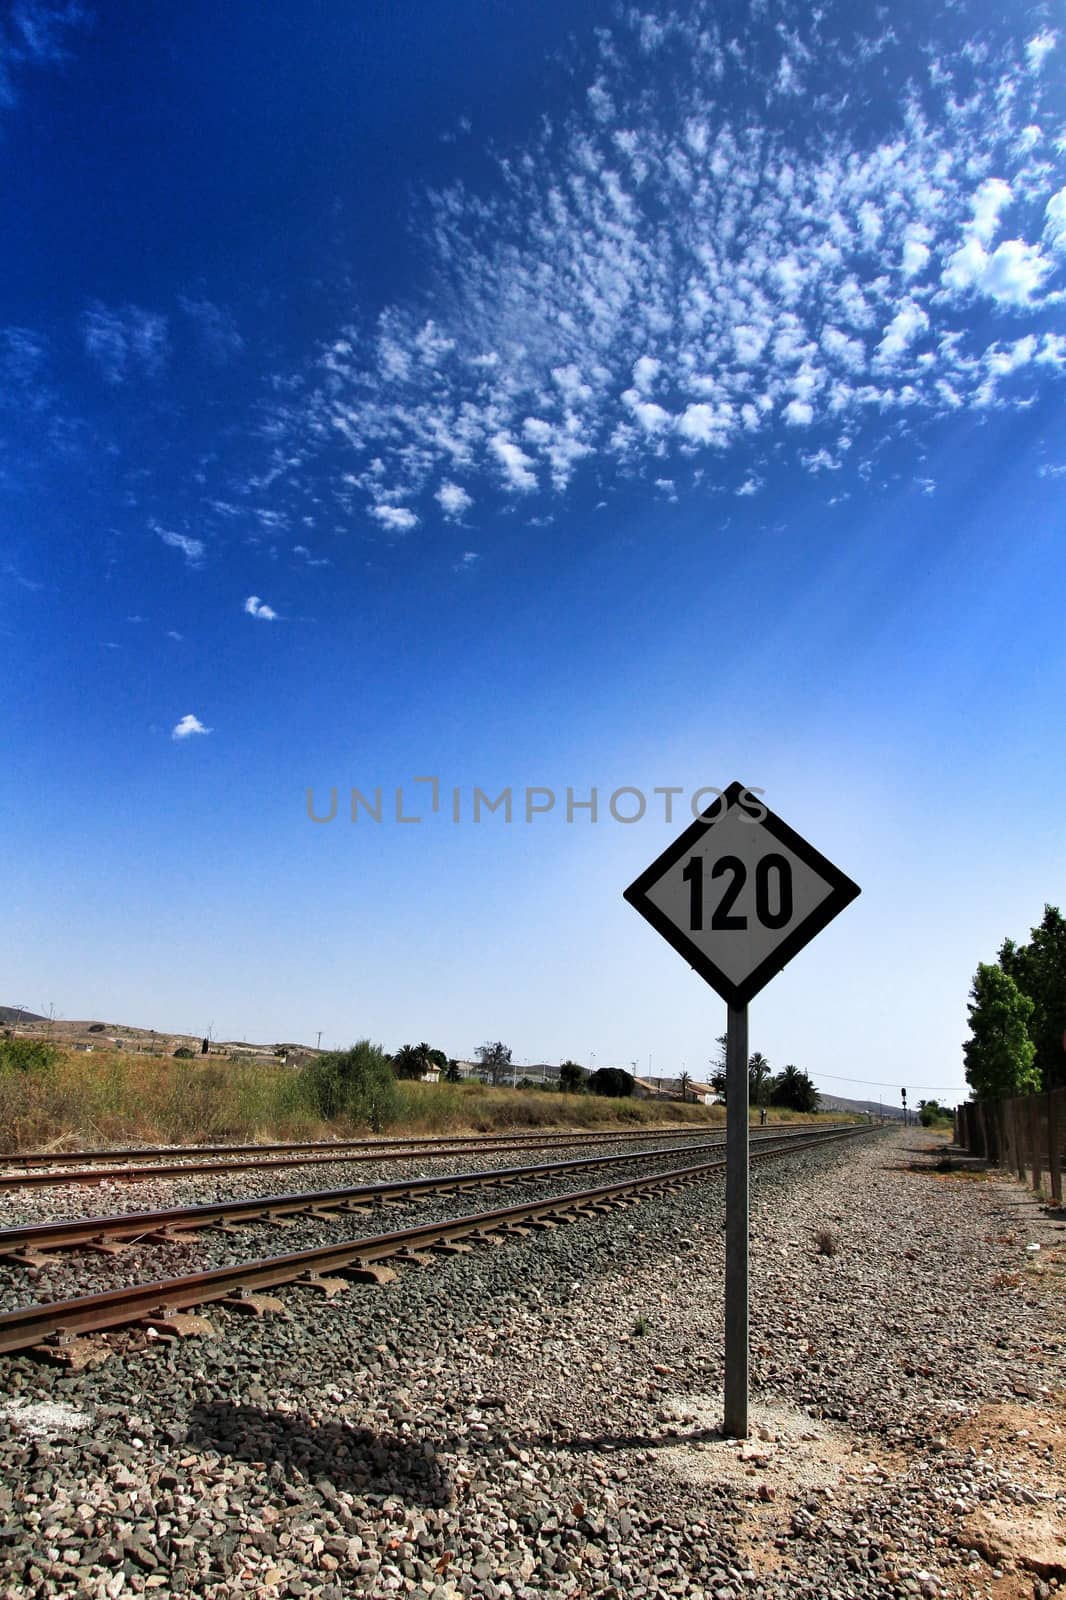 Speed sign limited to 120 km per hour next to train tracks in Spain